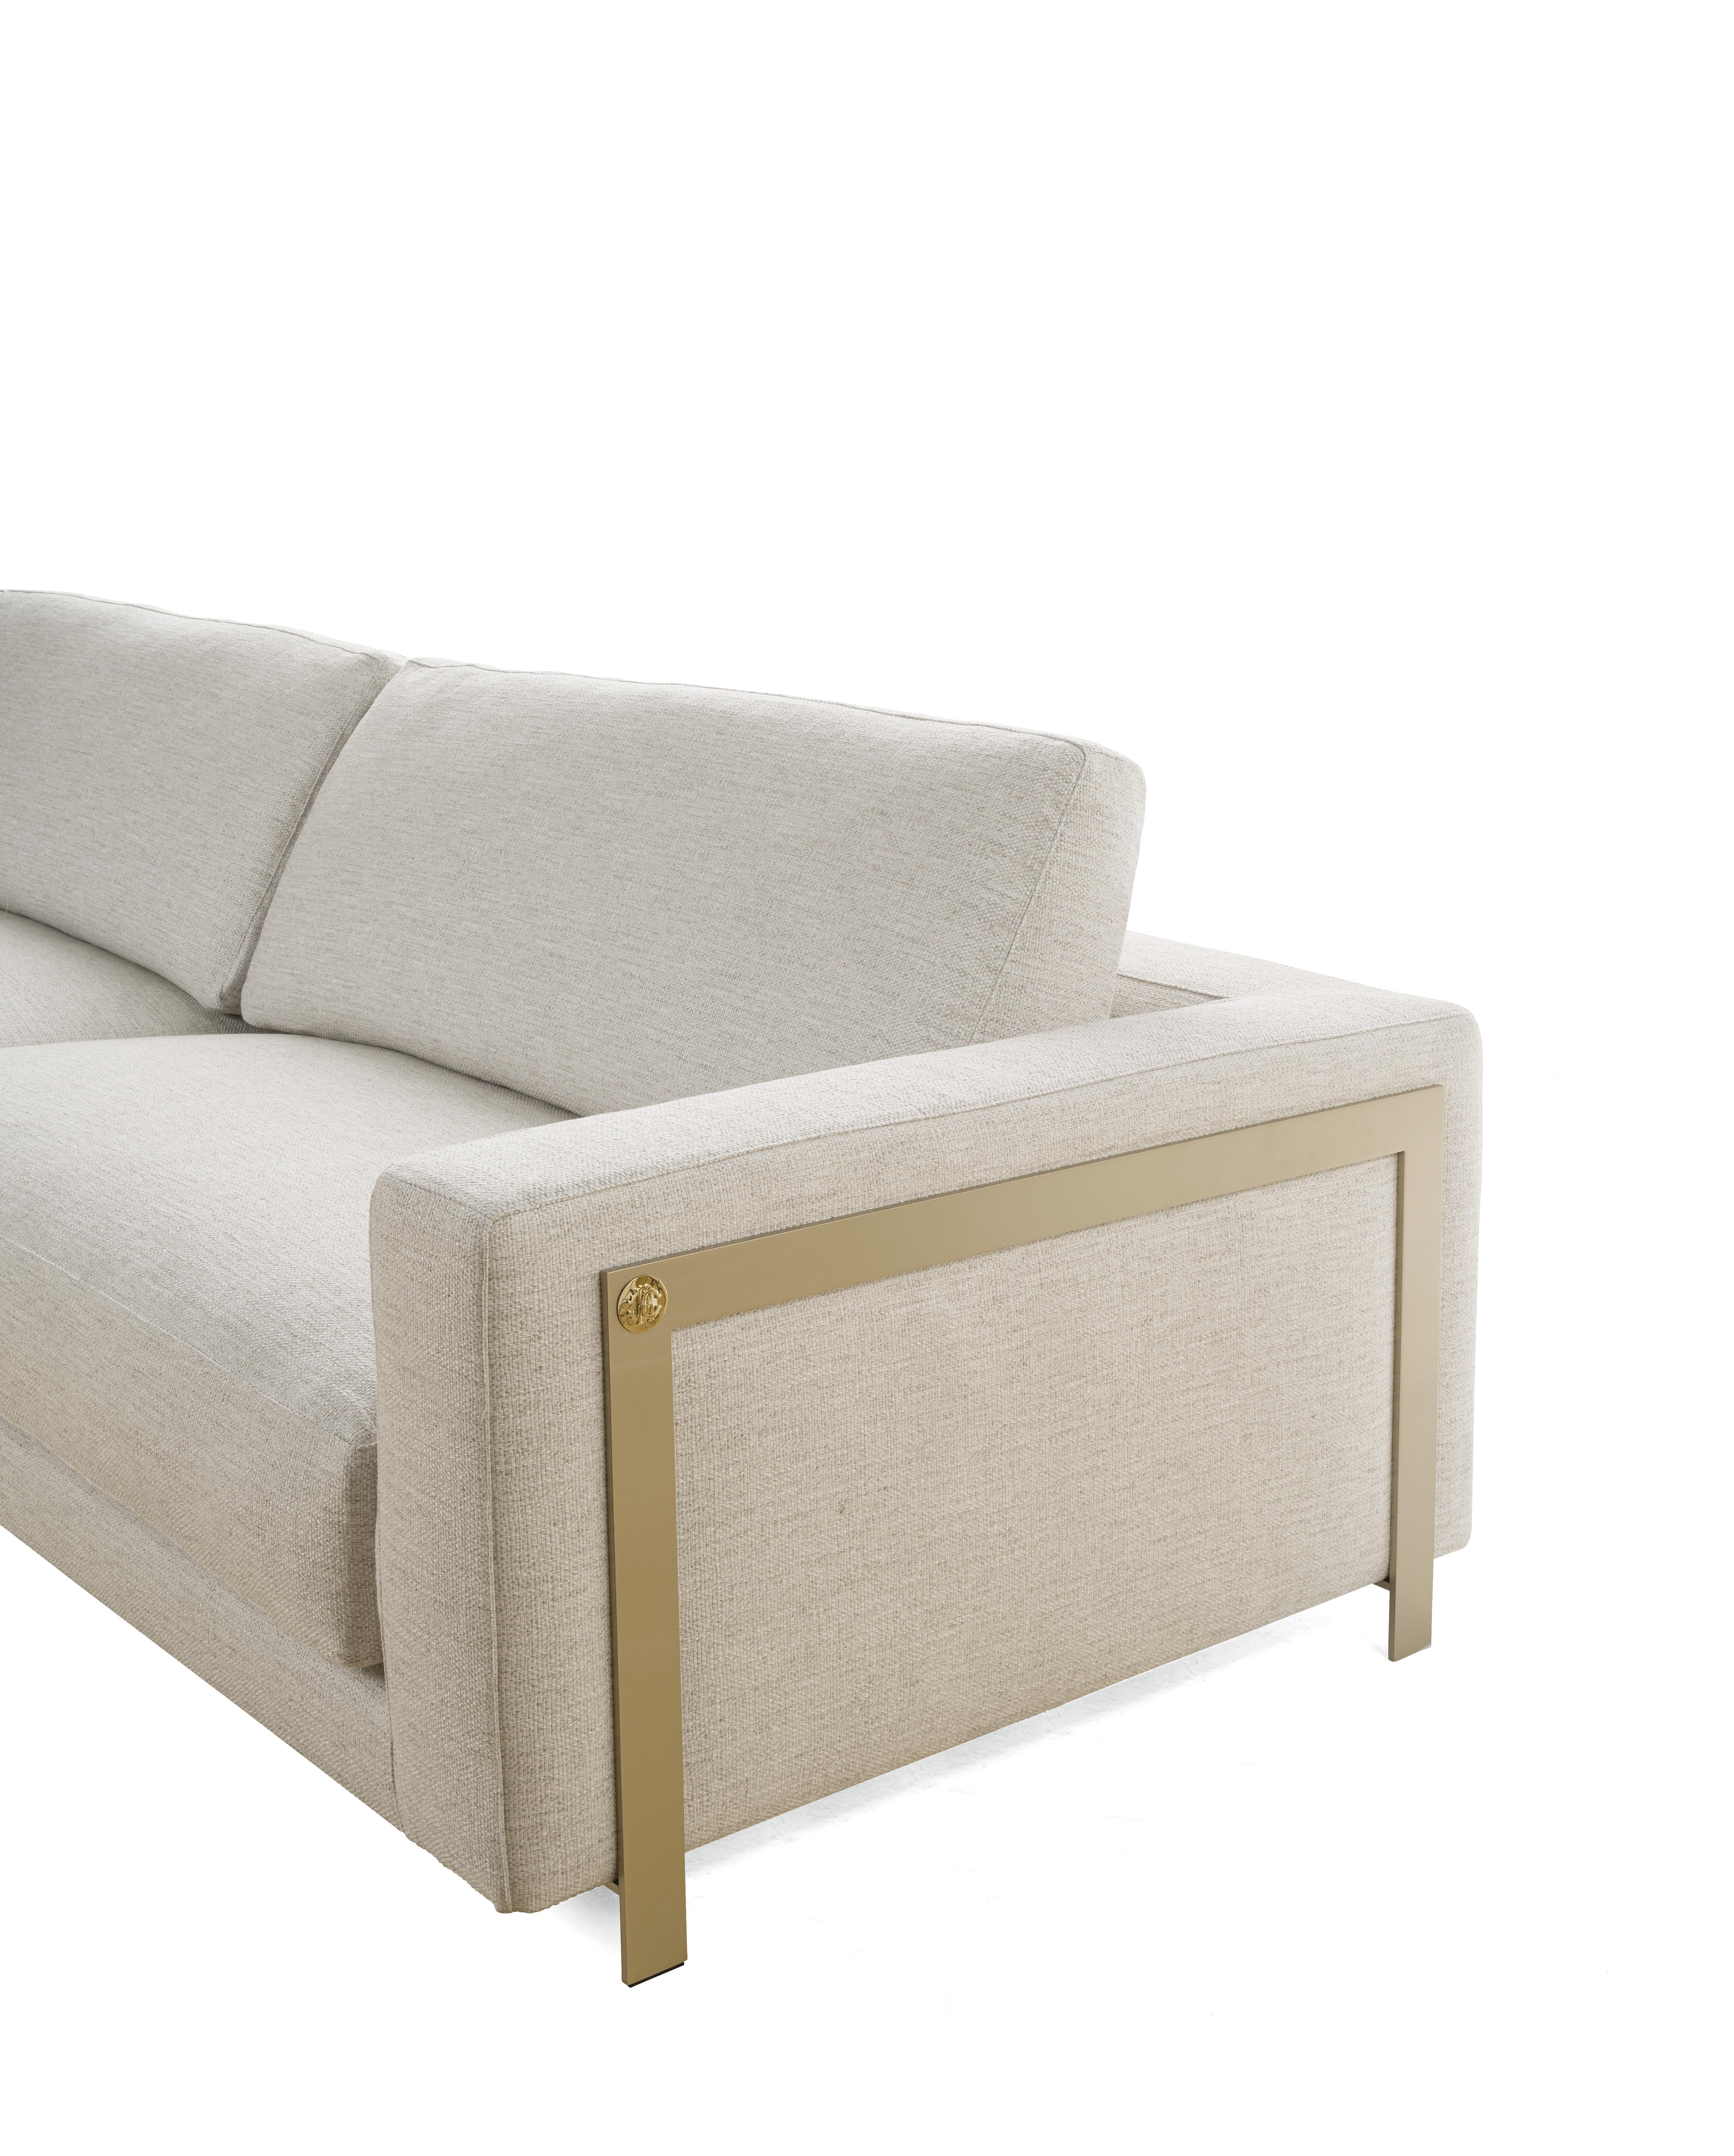 21st Century Manhattan Sofa in Fabric by Roberto Cavalli Home Interiors In New Condition For Sale In Cantù, Lombardia